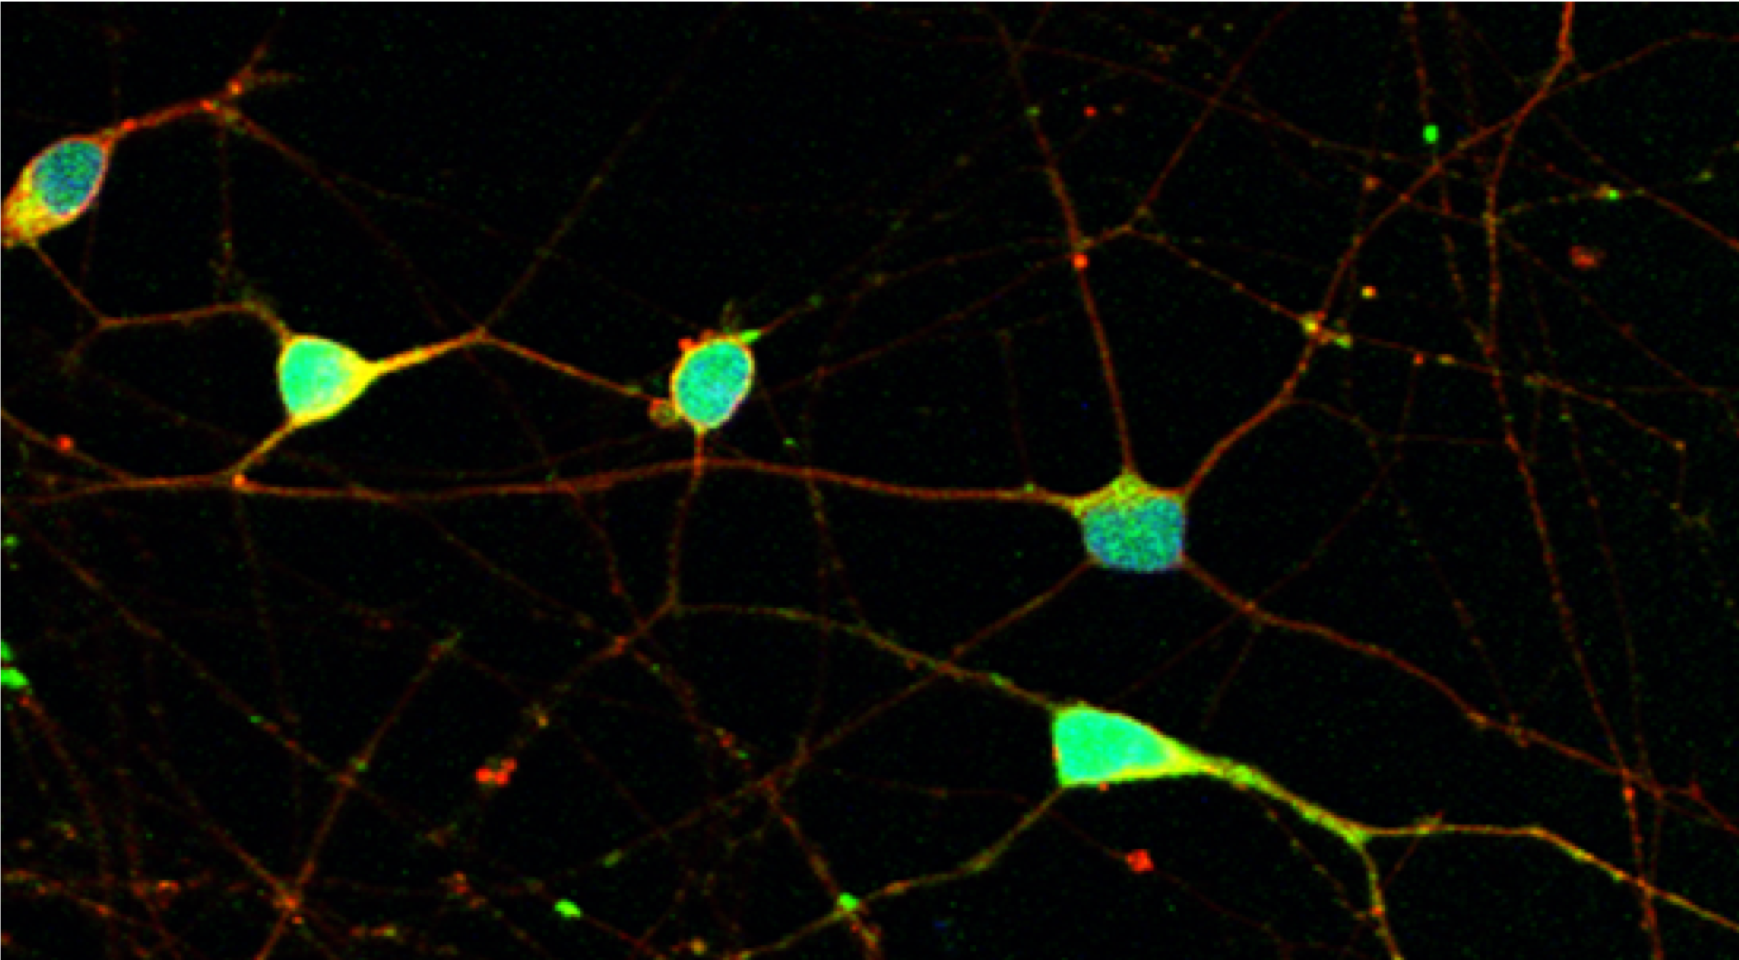 Human stem cells differentiated into retinal ganglion cells (RGCs).